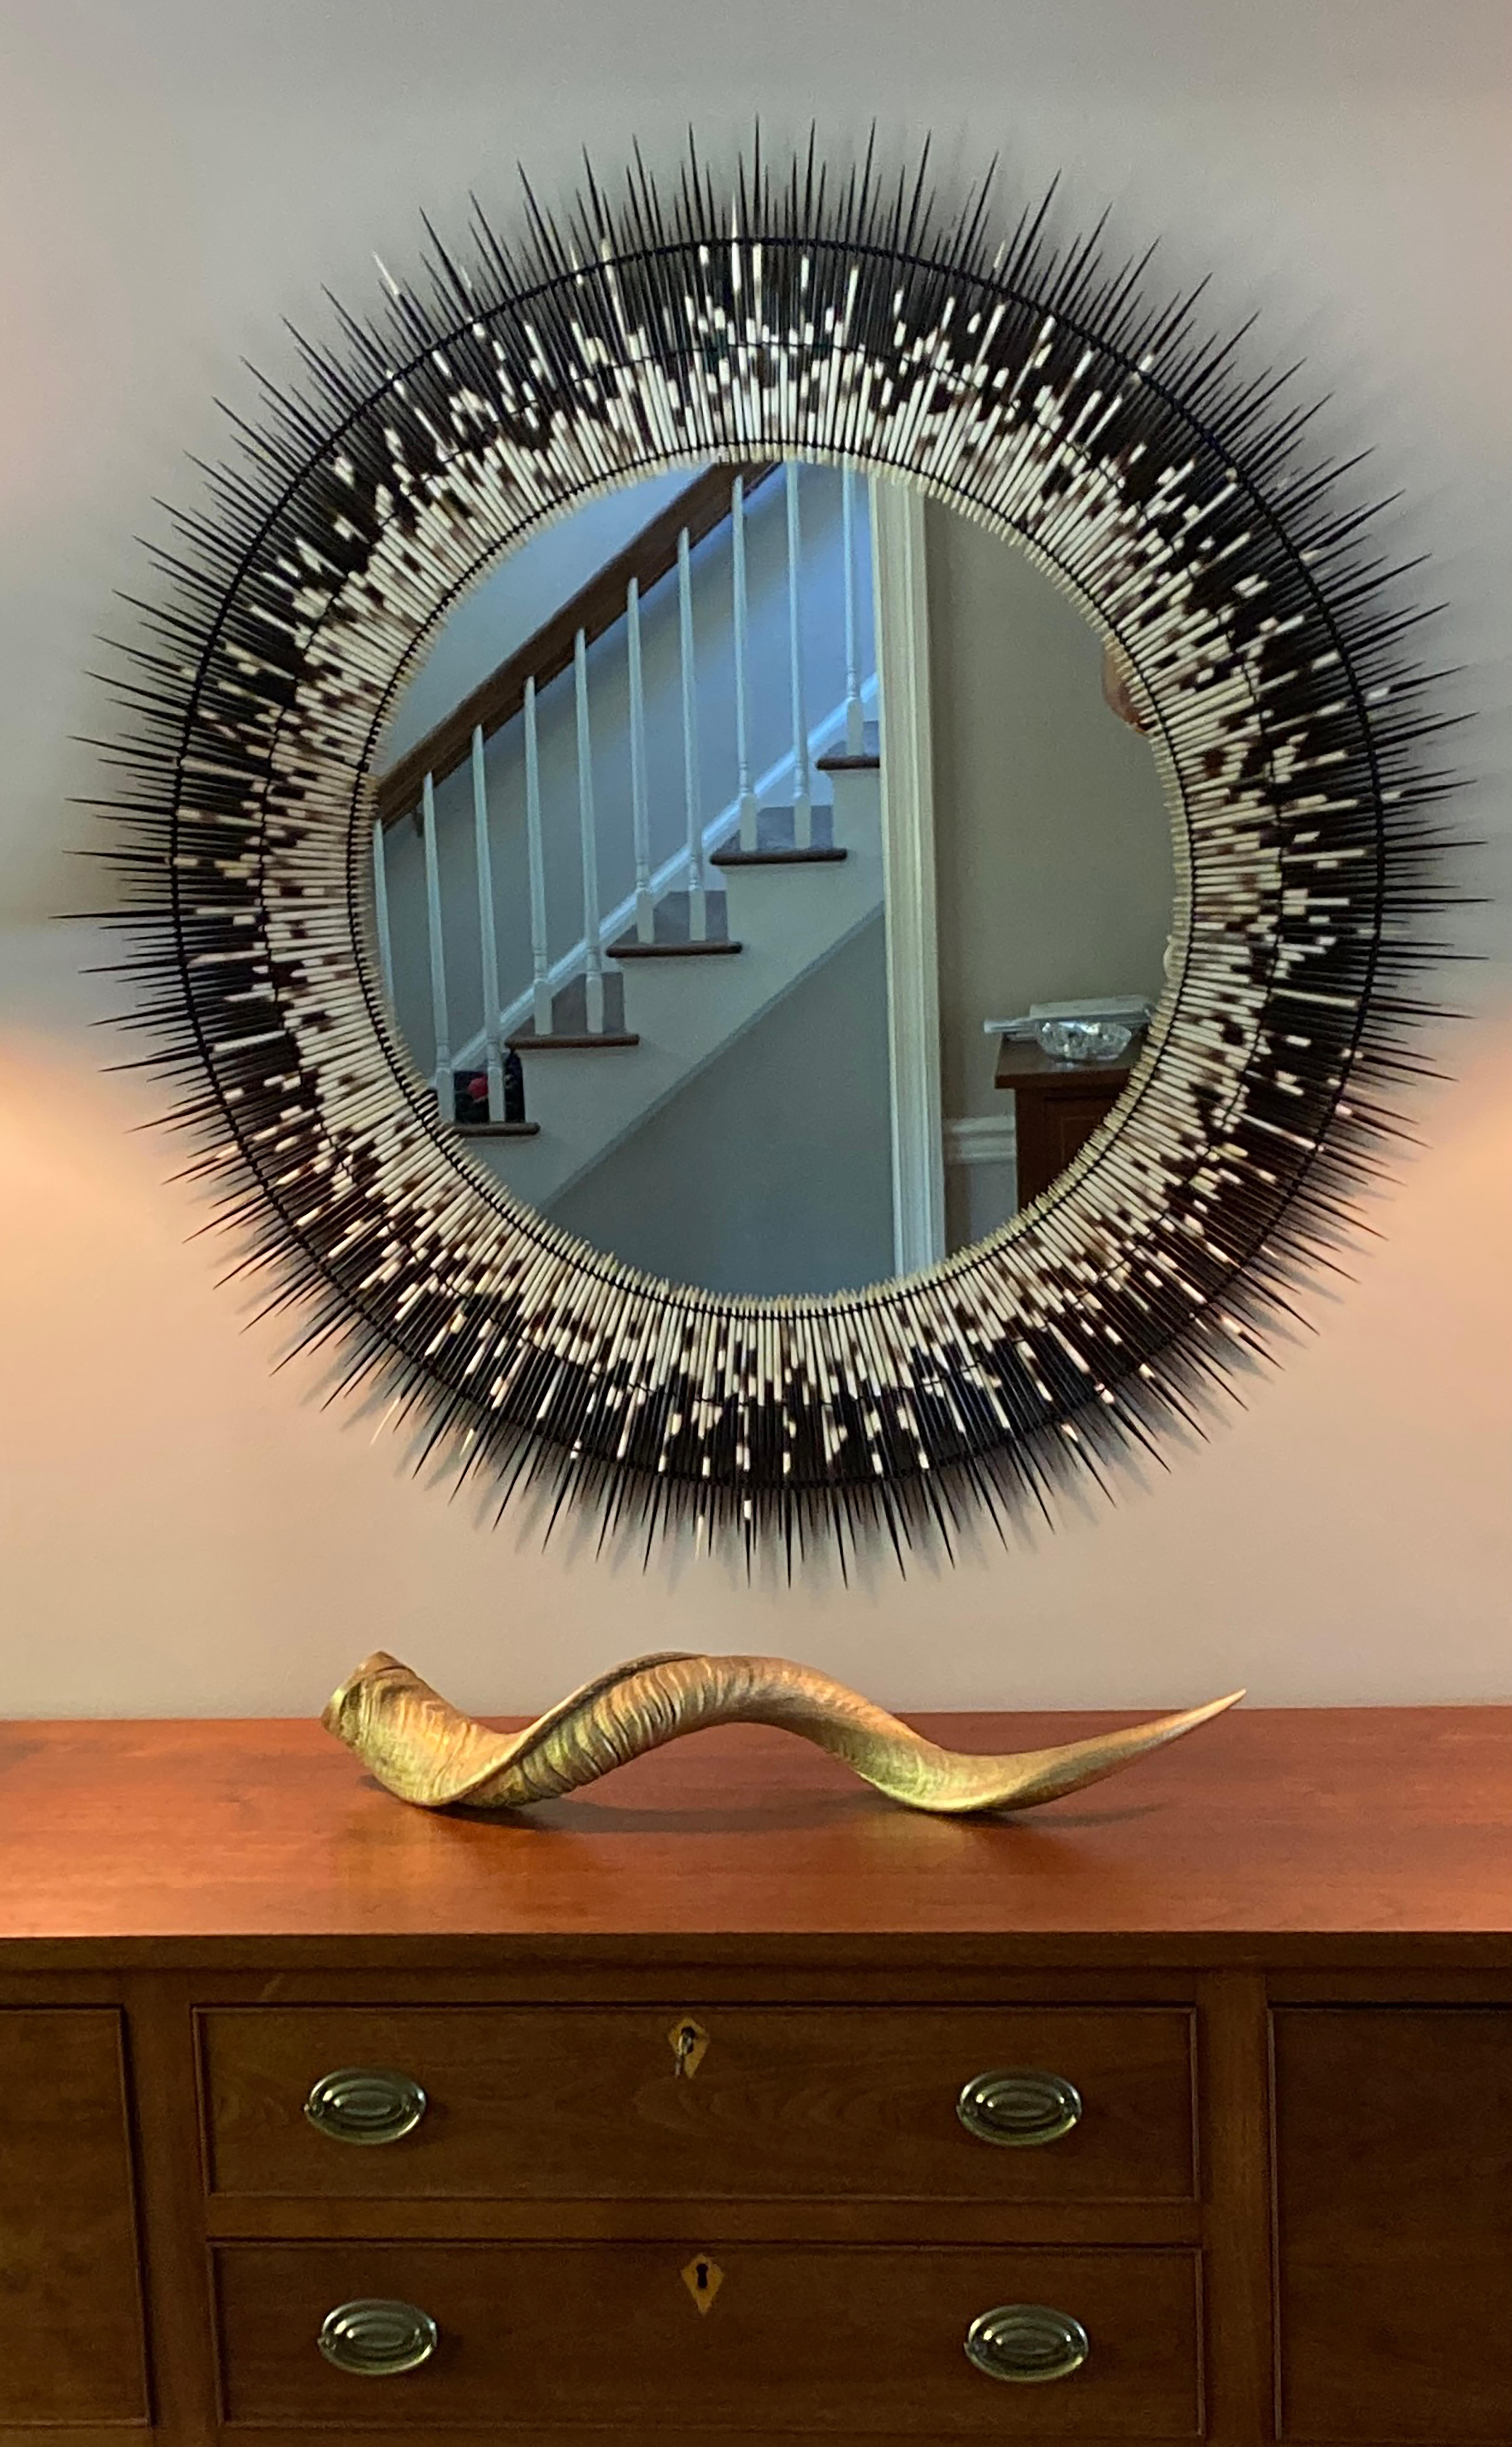 An earthy yet edgy take on the classic starburst mirror, this striking piece was handcrafted from genuine porcupine quills, naturally shed and collected on a farm in Cape Town, South Africa. Due to the use of natural materials, each piece is unique